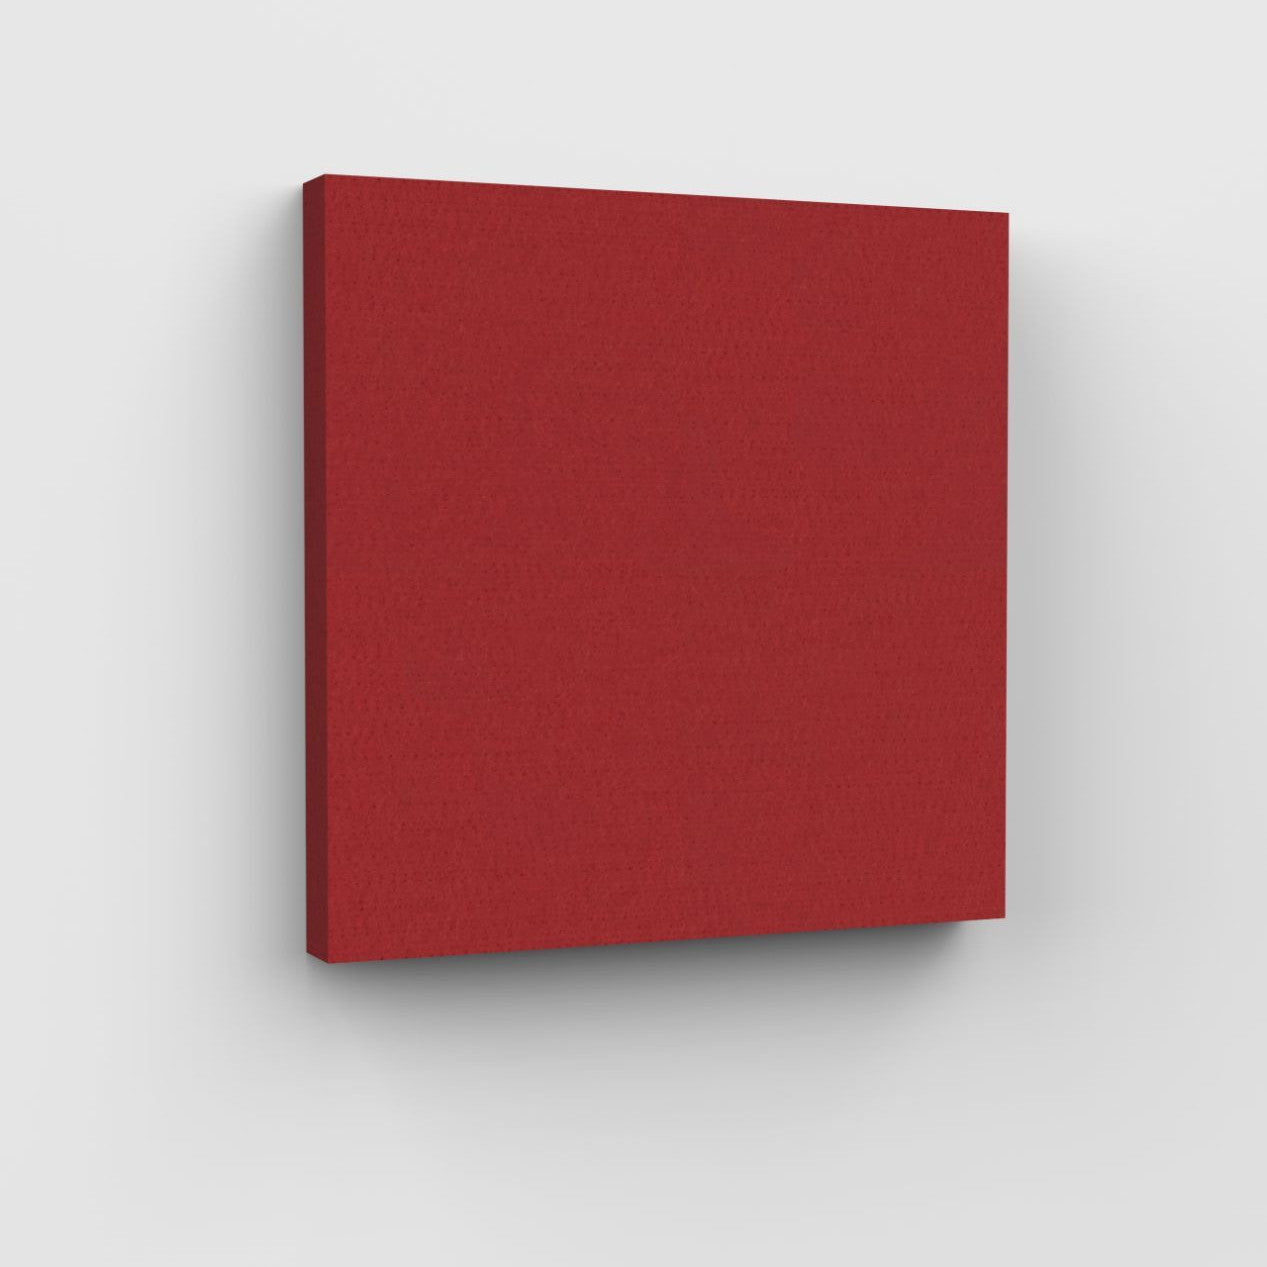 100% Recycled PET Felt Acoustic Square 60mm Red | Plastock